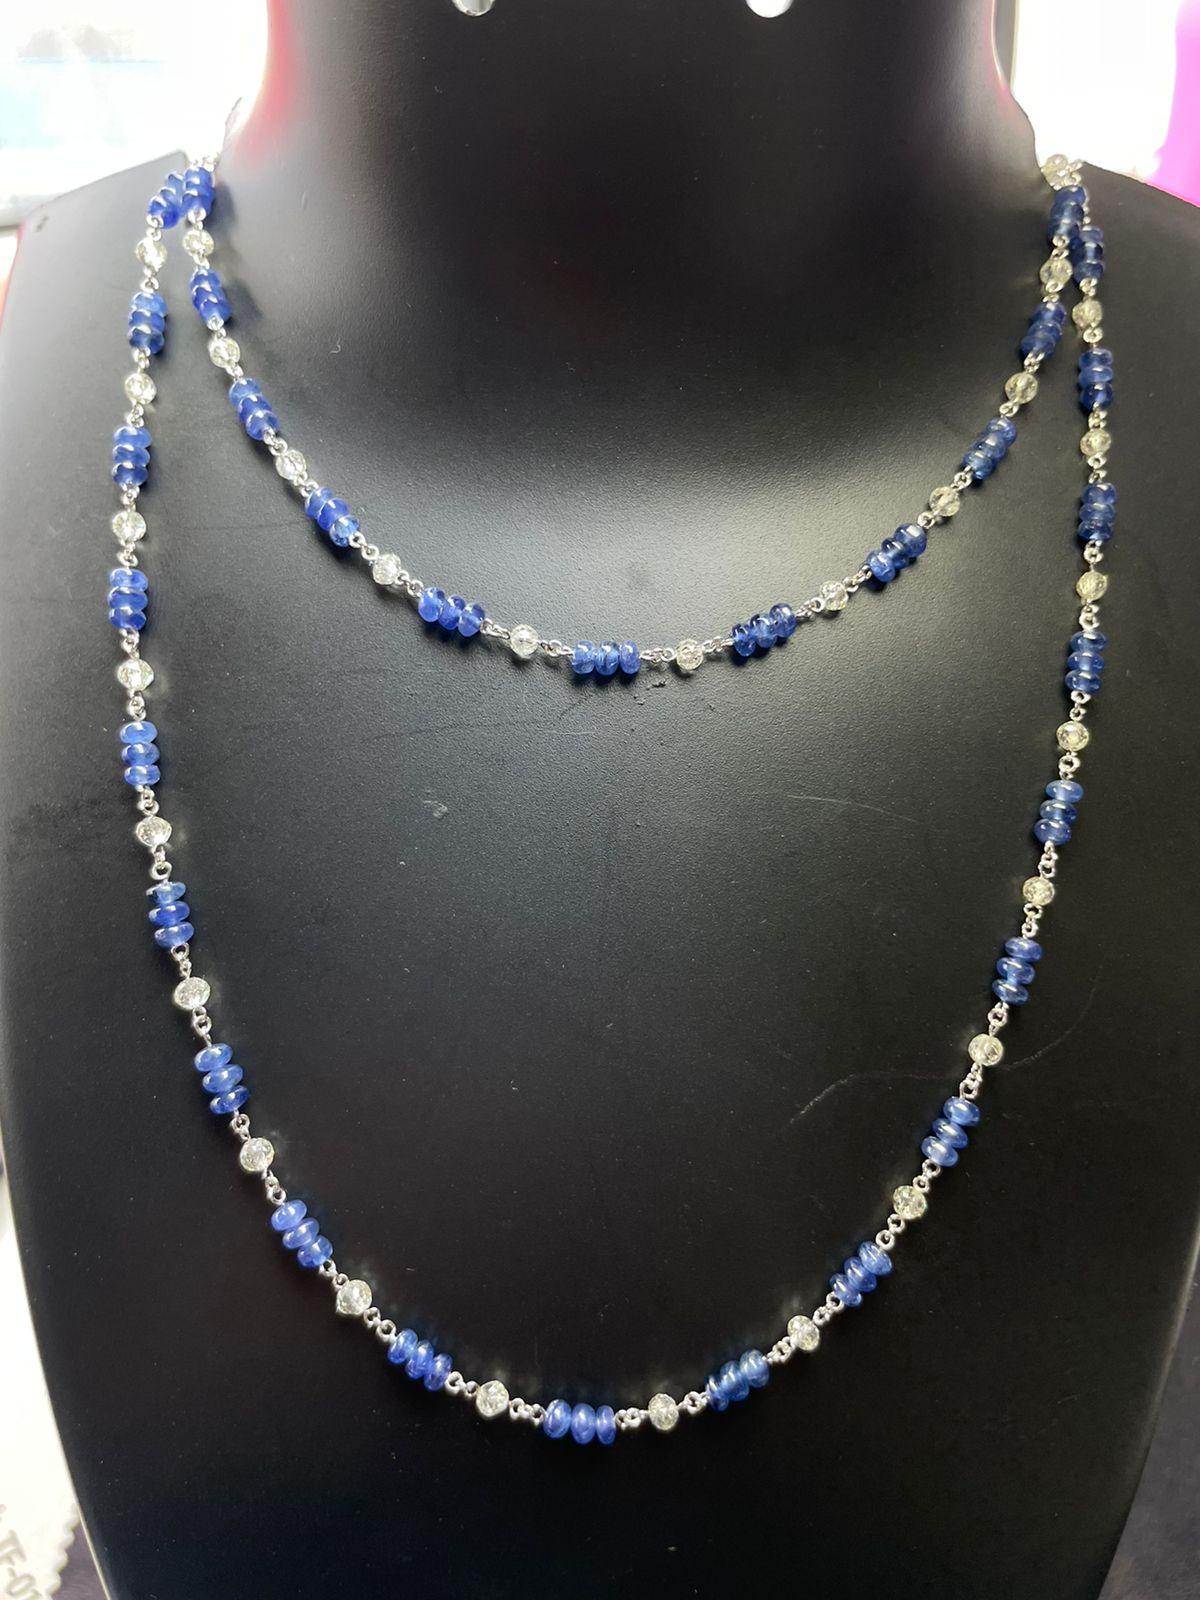 PANIM 18k White Gold Diamond Beads & Sapphire Necklace In New Condition For Sale In Tsim Sha Tsui, Hong Kong